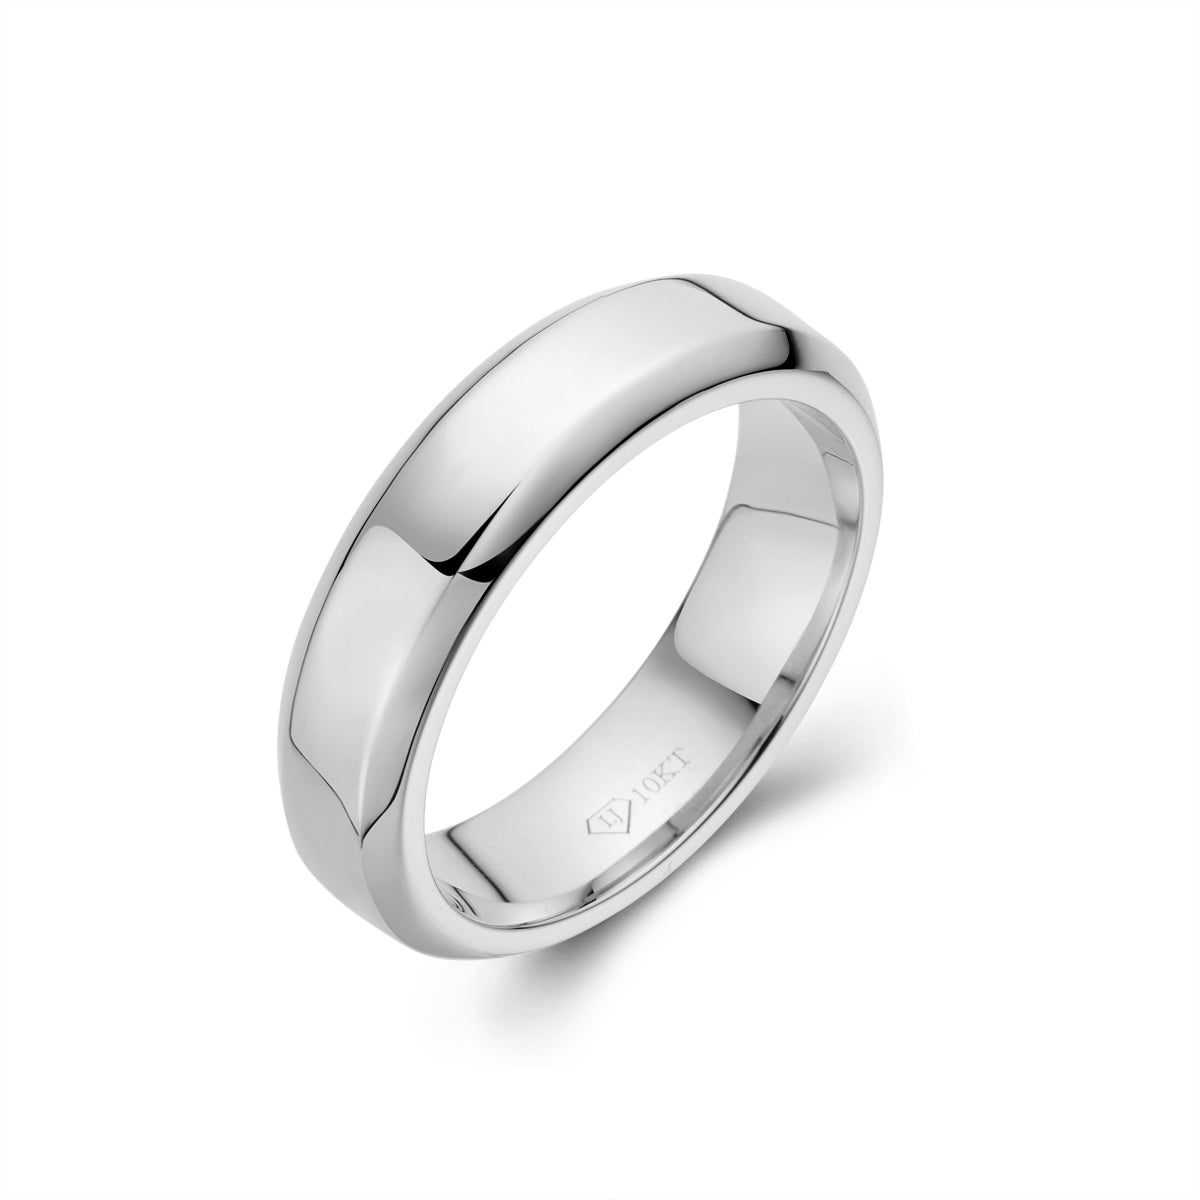 RI10 - Sterling Silver Simple Band Ring | Jenni K - Fine Handcrafted Jewelry